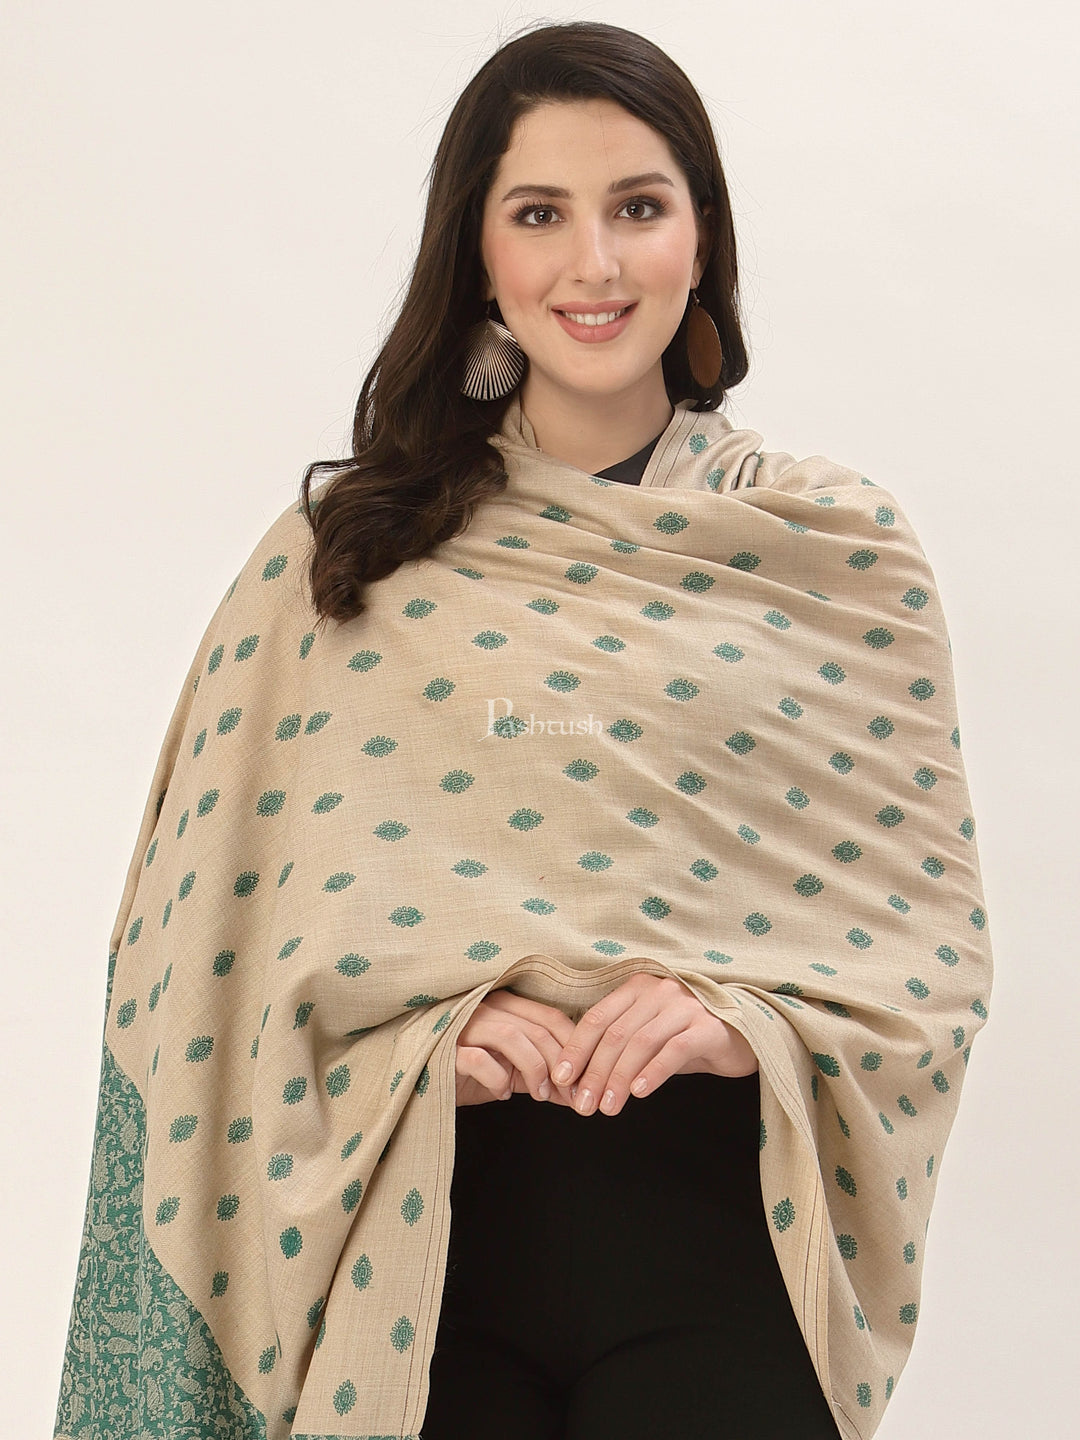 Pashtush India Gift Pack Pashtush His And Her Gift Set Of Checkered Stole And Embroidery Shawl With Premium Gift Box Packaging, Bottle Green and Beige